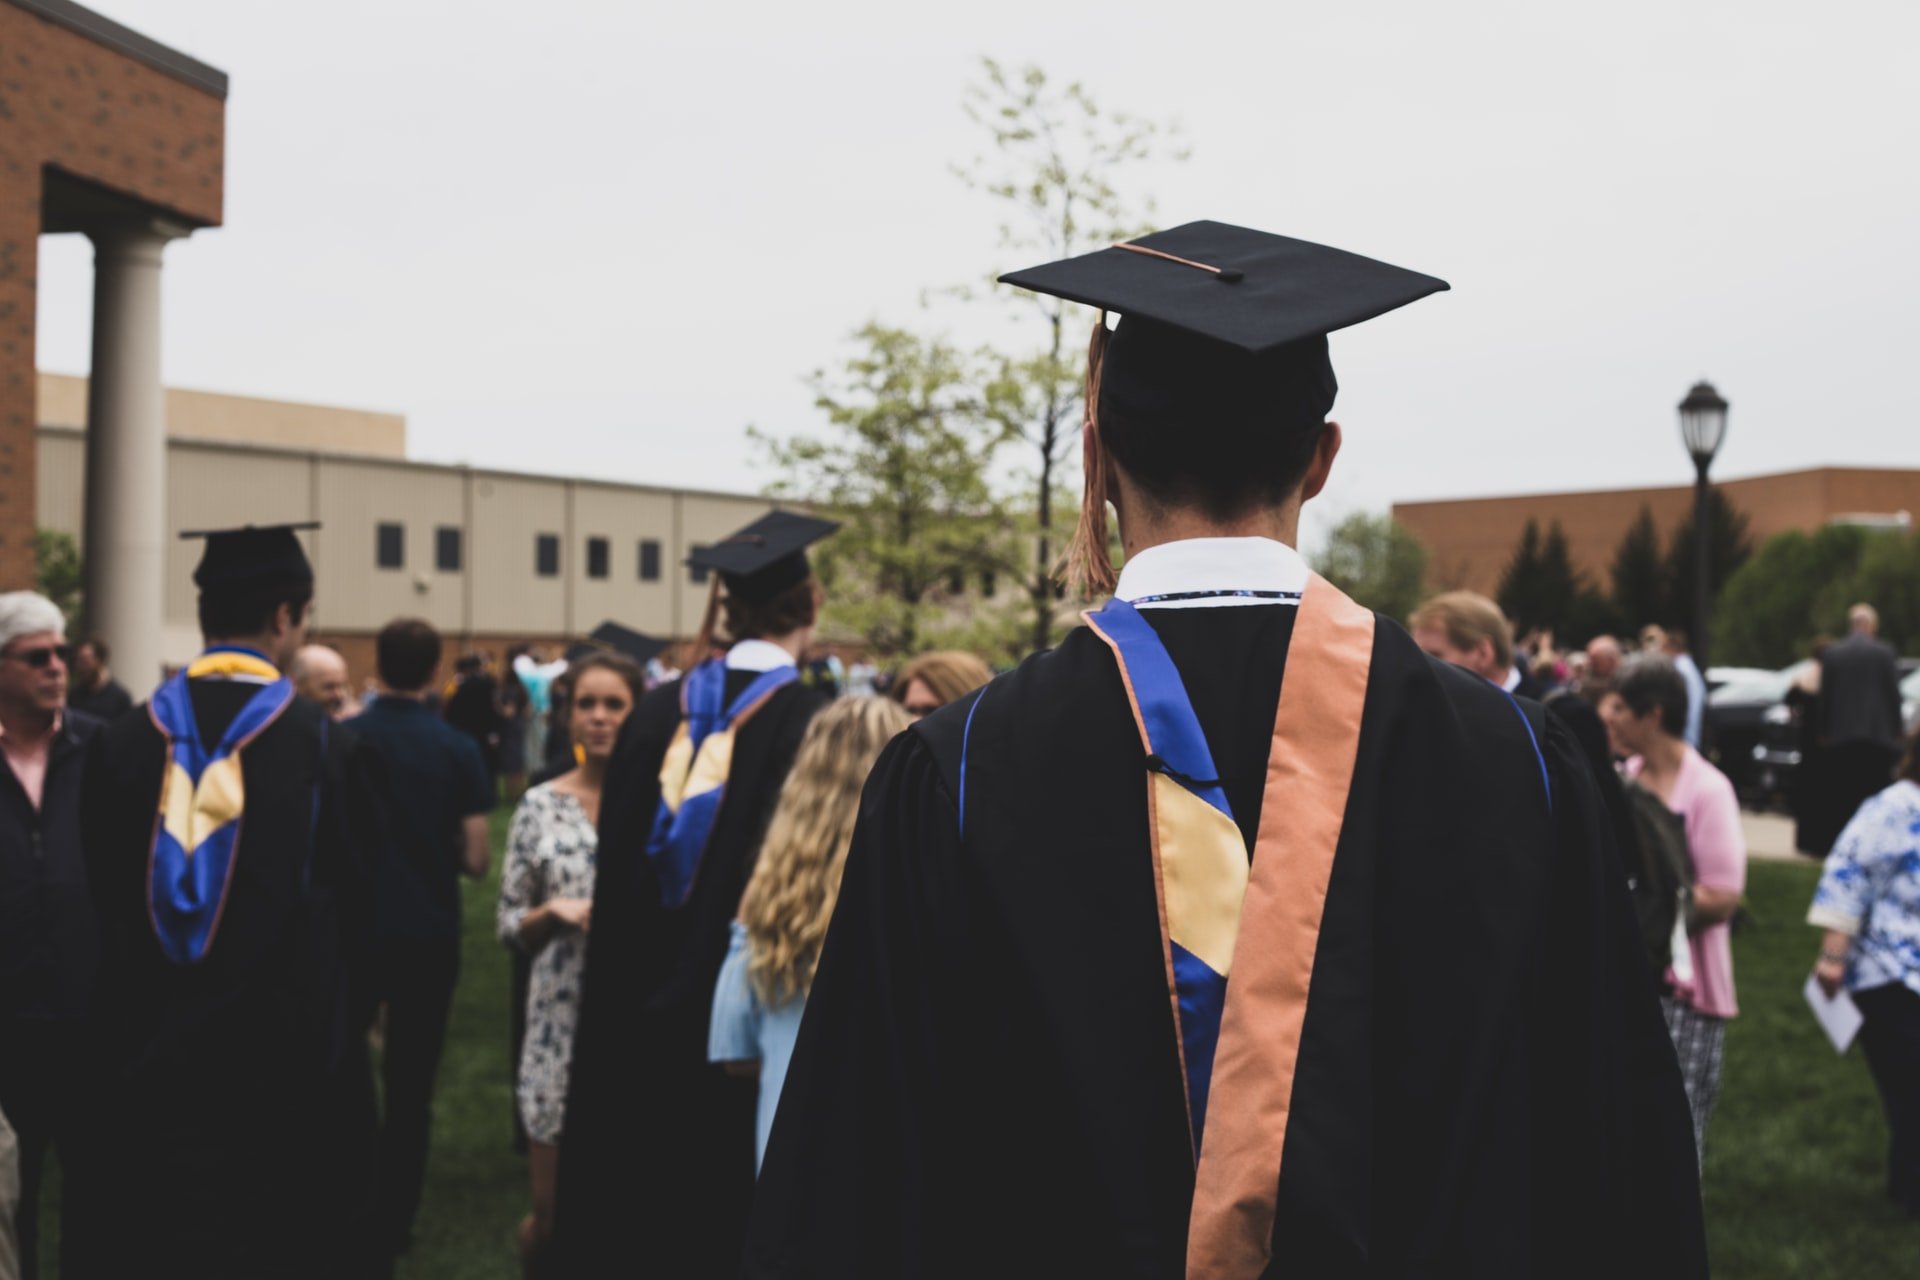 OP was busy with his daughter's graduation ceremony so he never got to speak to his wife again. | Source: Unsplash